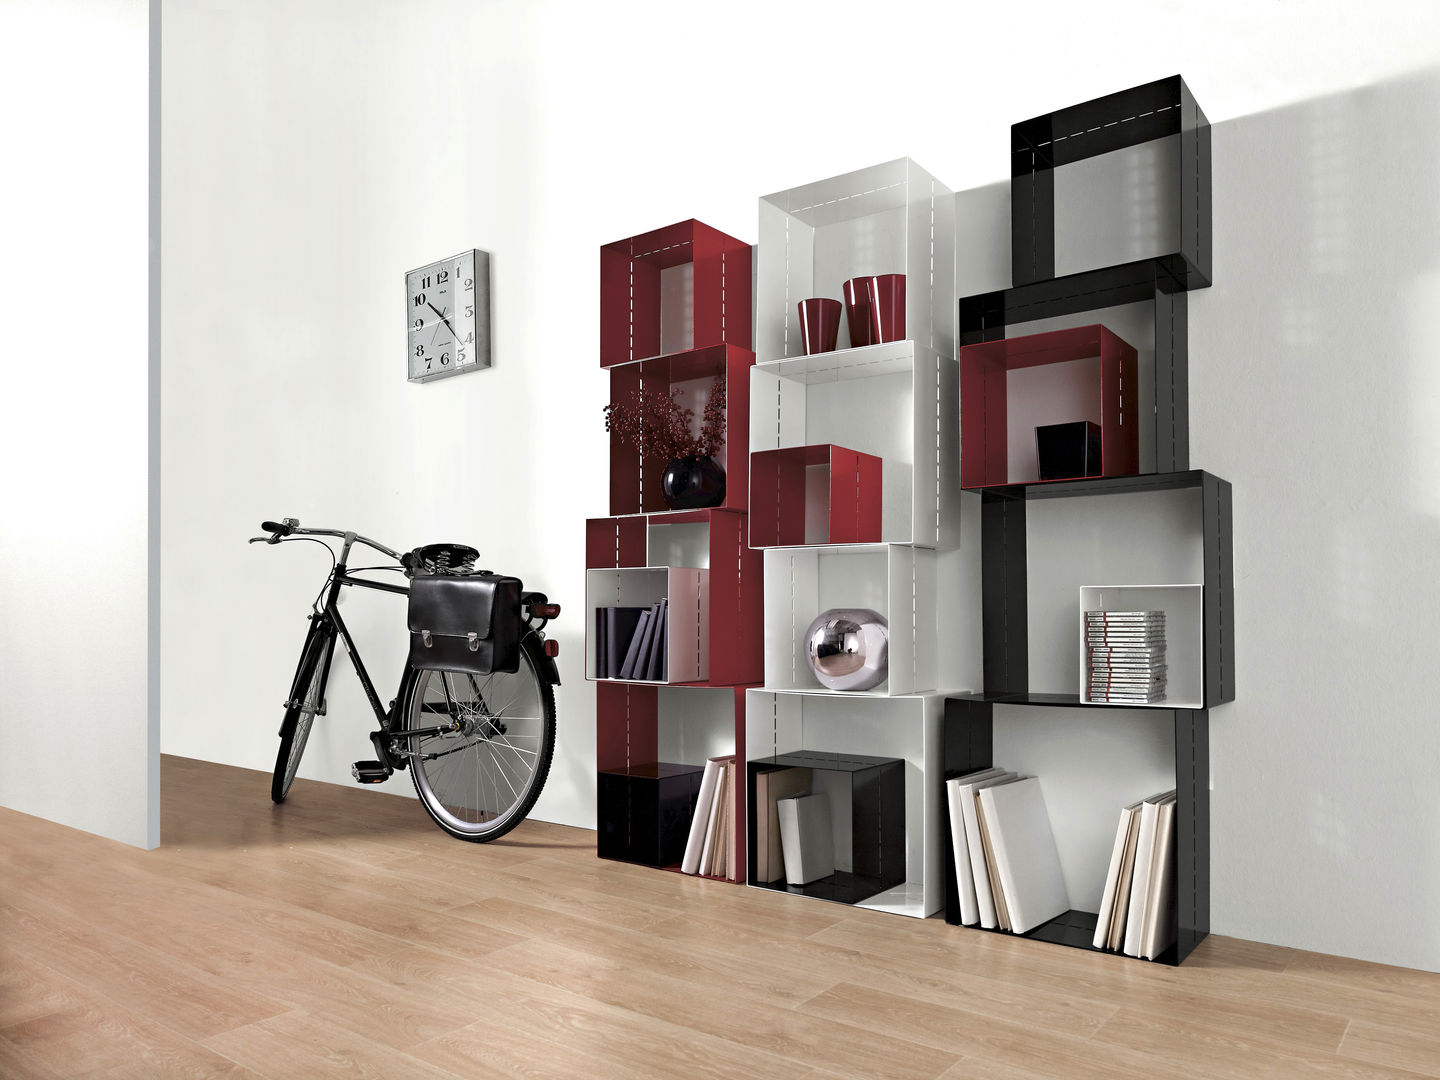 Kit cubolibre , Officinanove Officinanove Modern houses Accessories & decoration